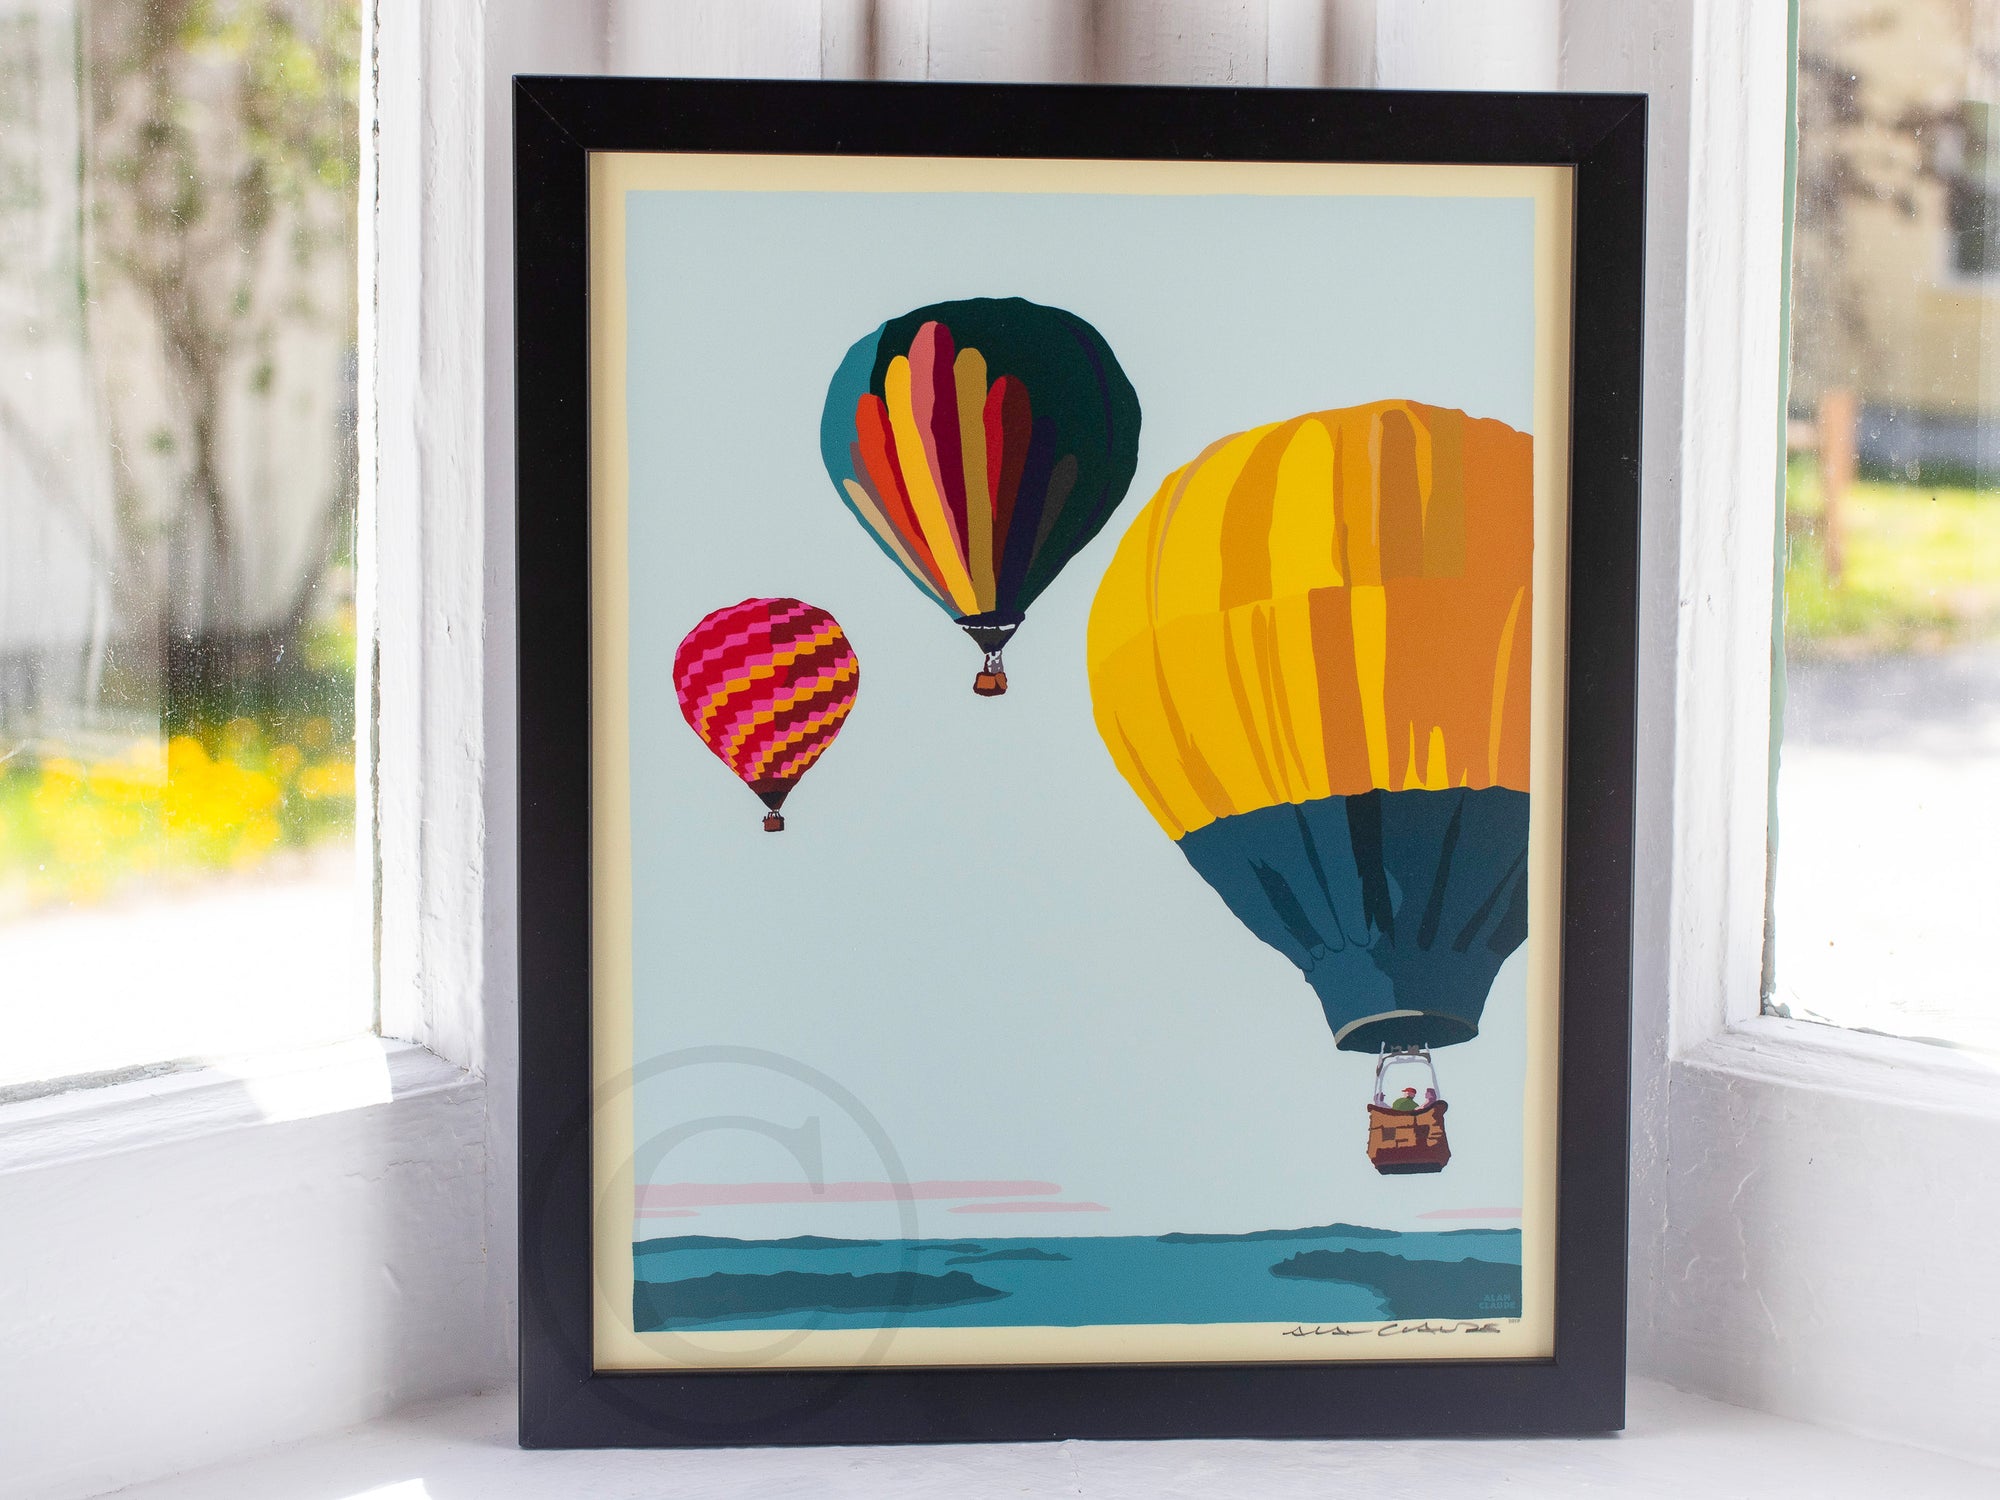 Balloons Over Islands Art Print 8" x 10" Framed Wall Poster By Alan Claude - Maine